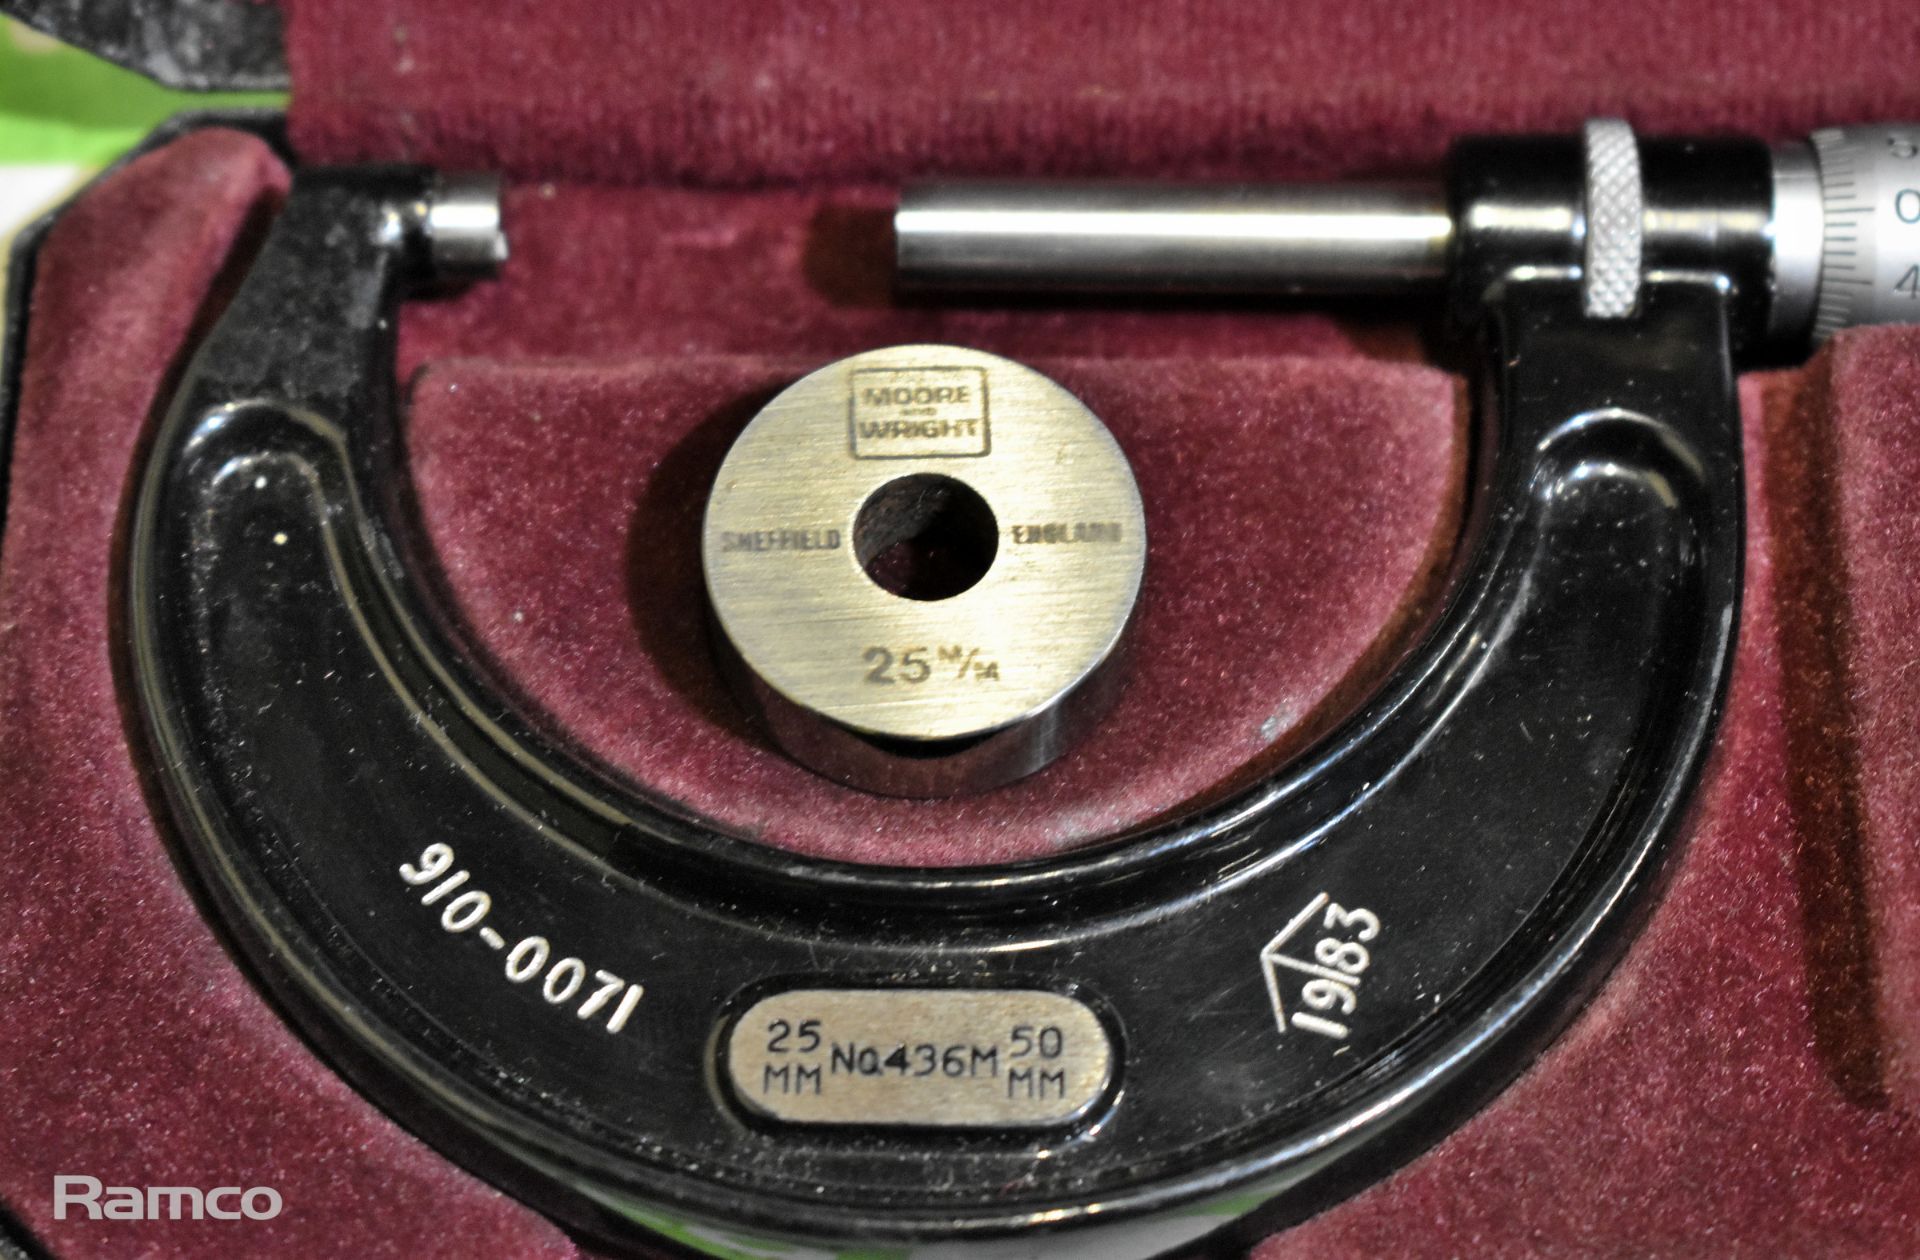 2x Starrett No 436 25-50mm micrometer calipers with case (incomplete) - Image 4 of 6